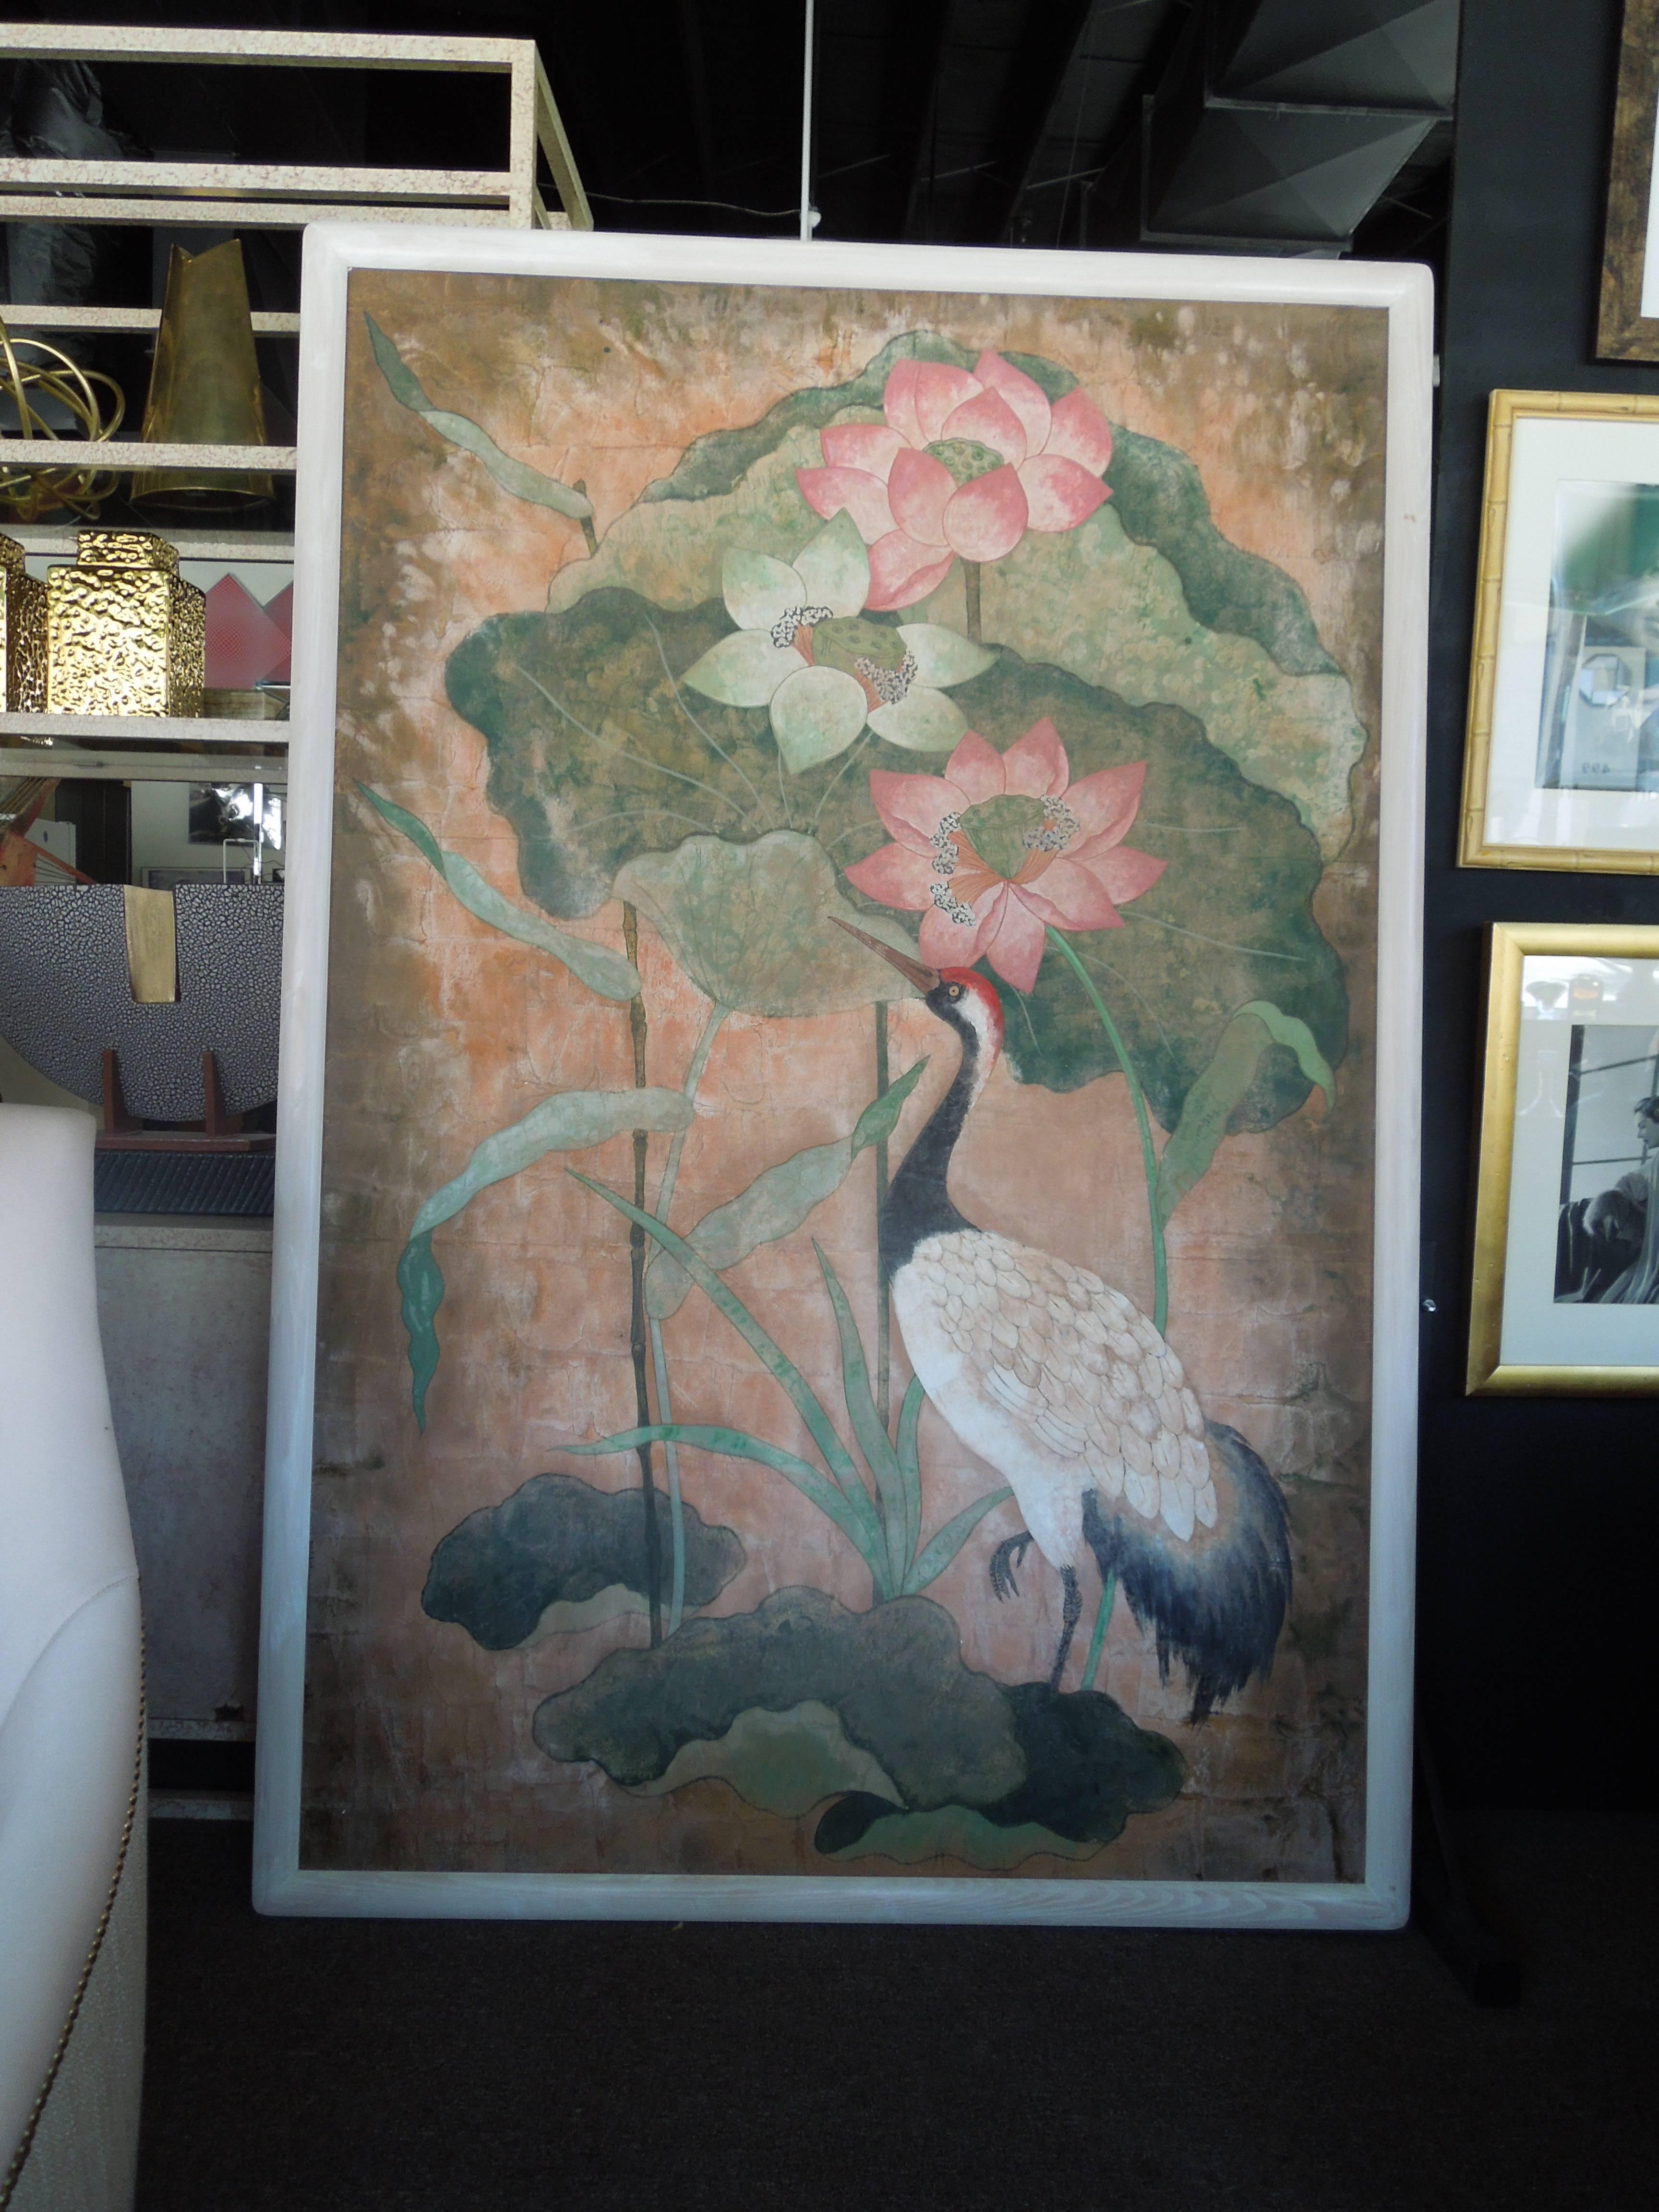 This monumental size Hollywood/chinoiserie style original paintings that were done in the early 1980s for a very upscale, uber chic multi-million dollar Hollywood Regency Estate in Rancho Mirage, CA. The monumental size painting depicts a flora and